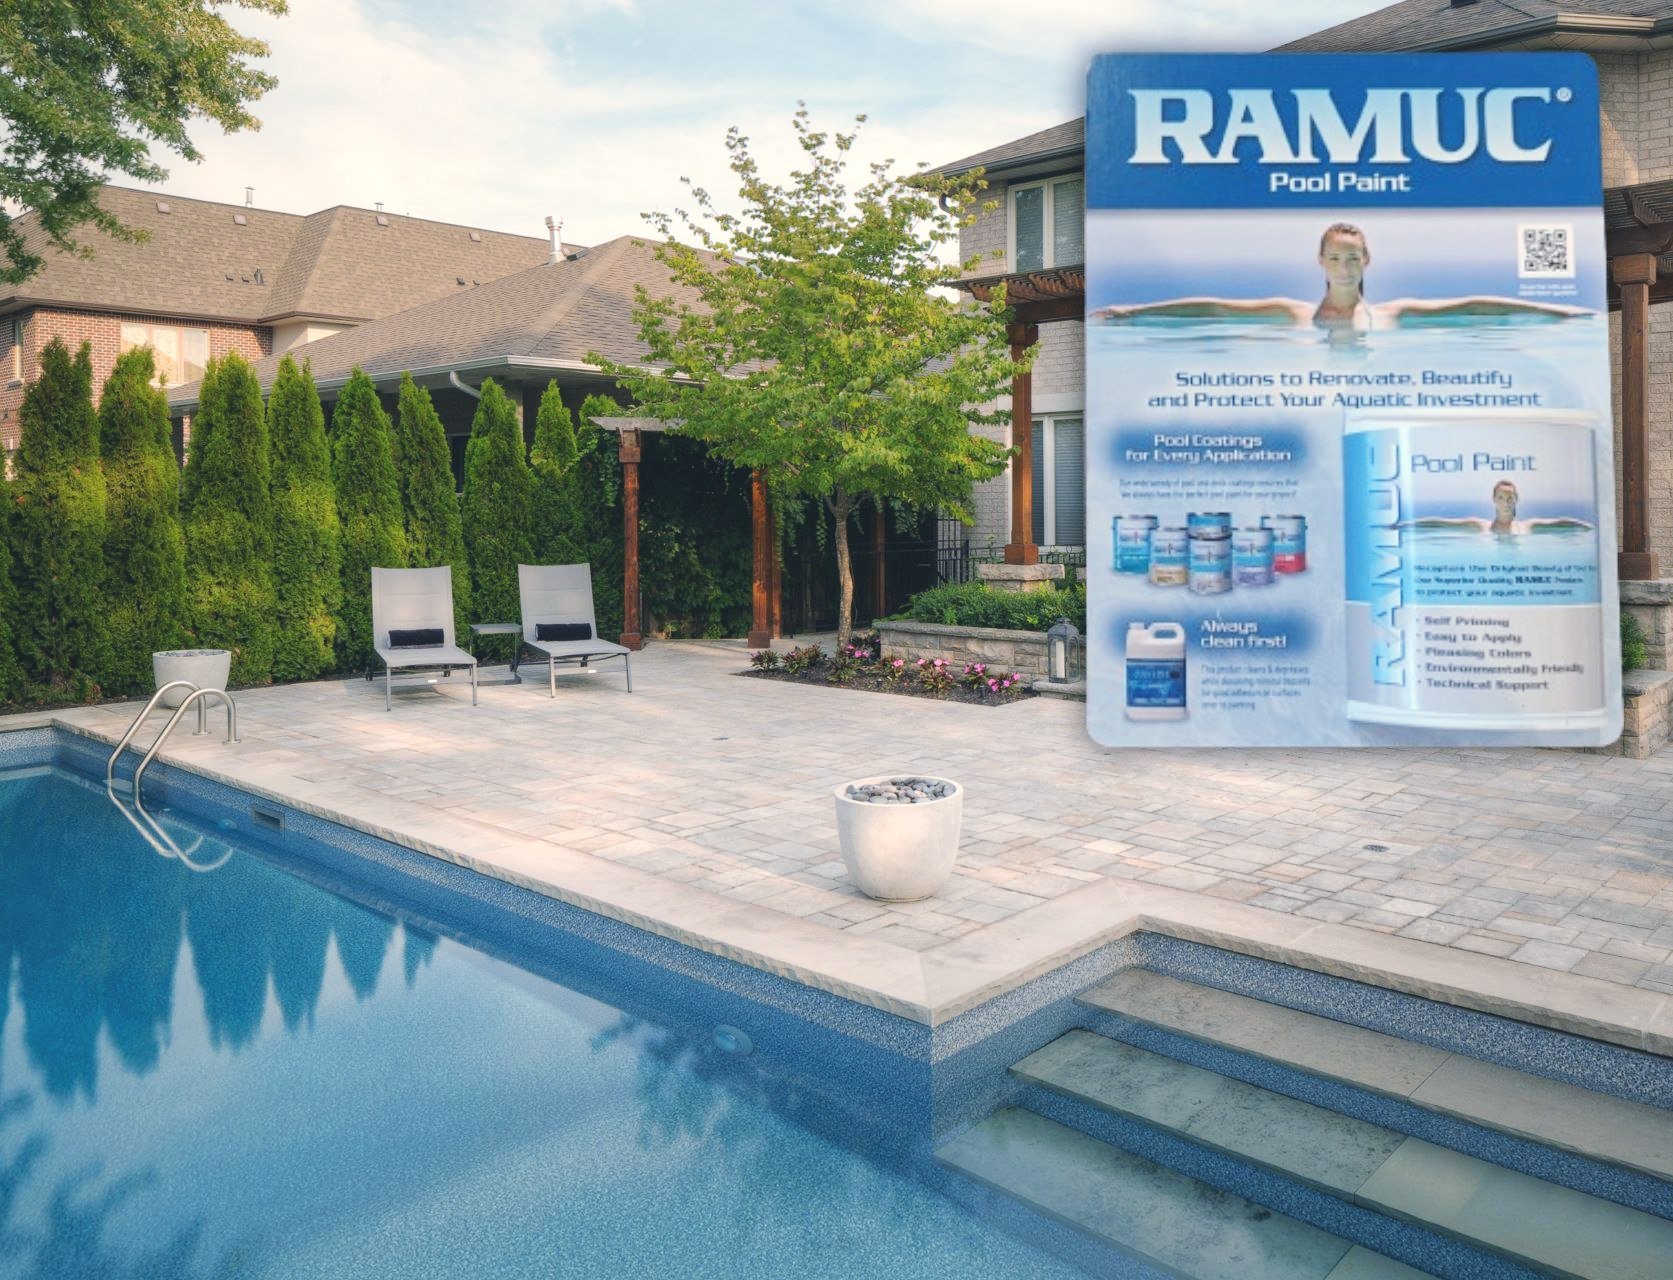 Is it time to give your pool a refresh? Ramuc Pool Paint products might be the right ones for you! Ramuc is a leading manufacturer of specialty aquatic coatings that has been trusted for almost 90 years to protect and rejuvenate swimming pools, spas,